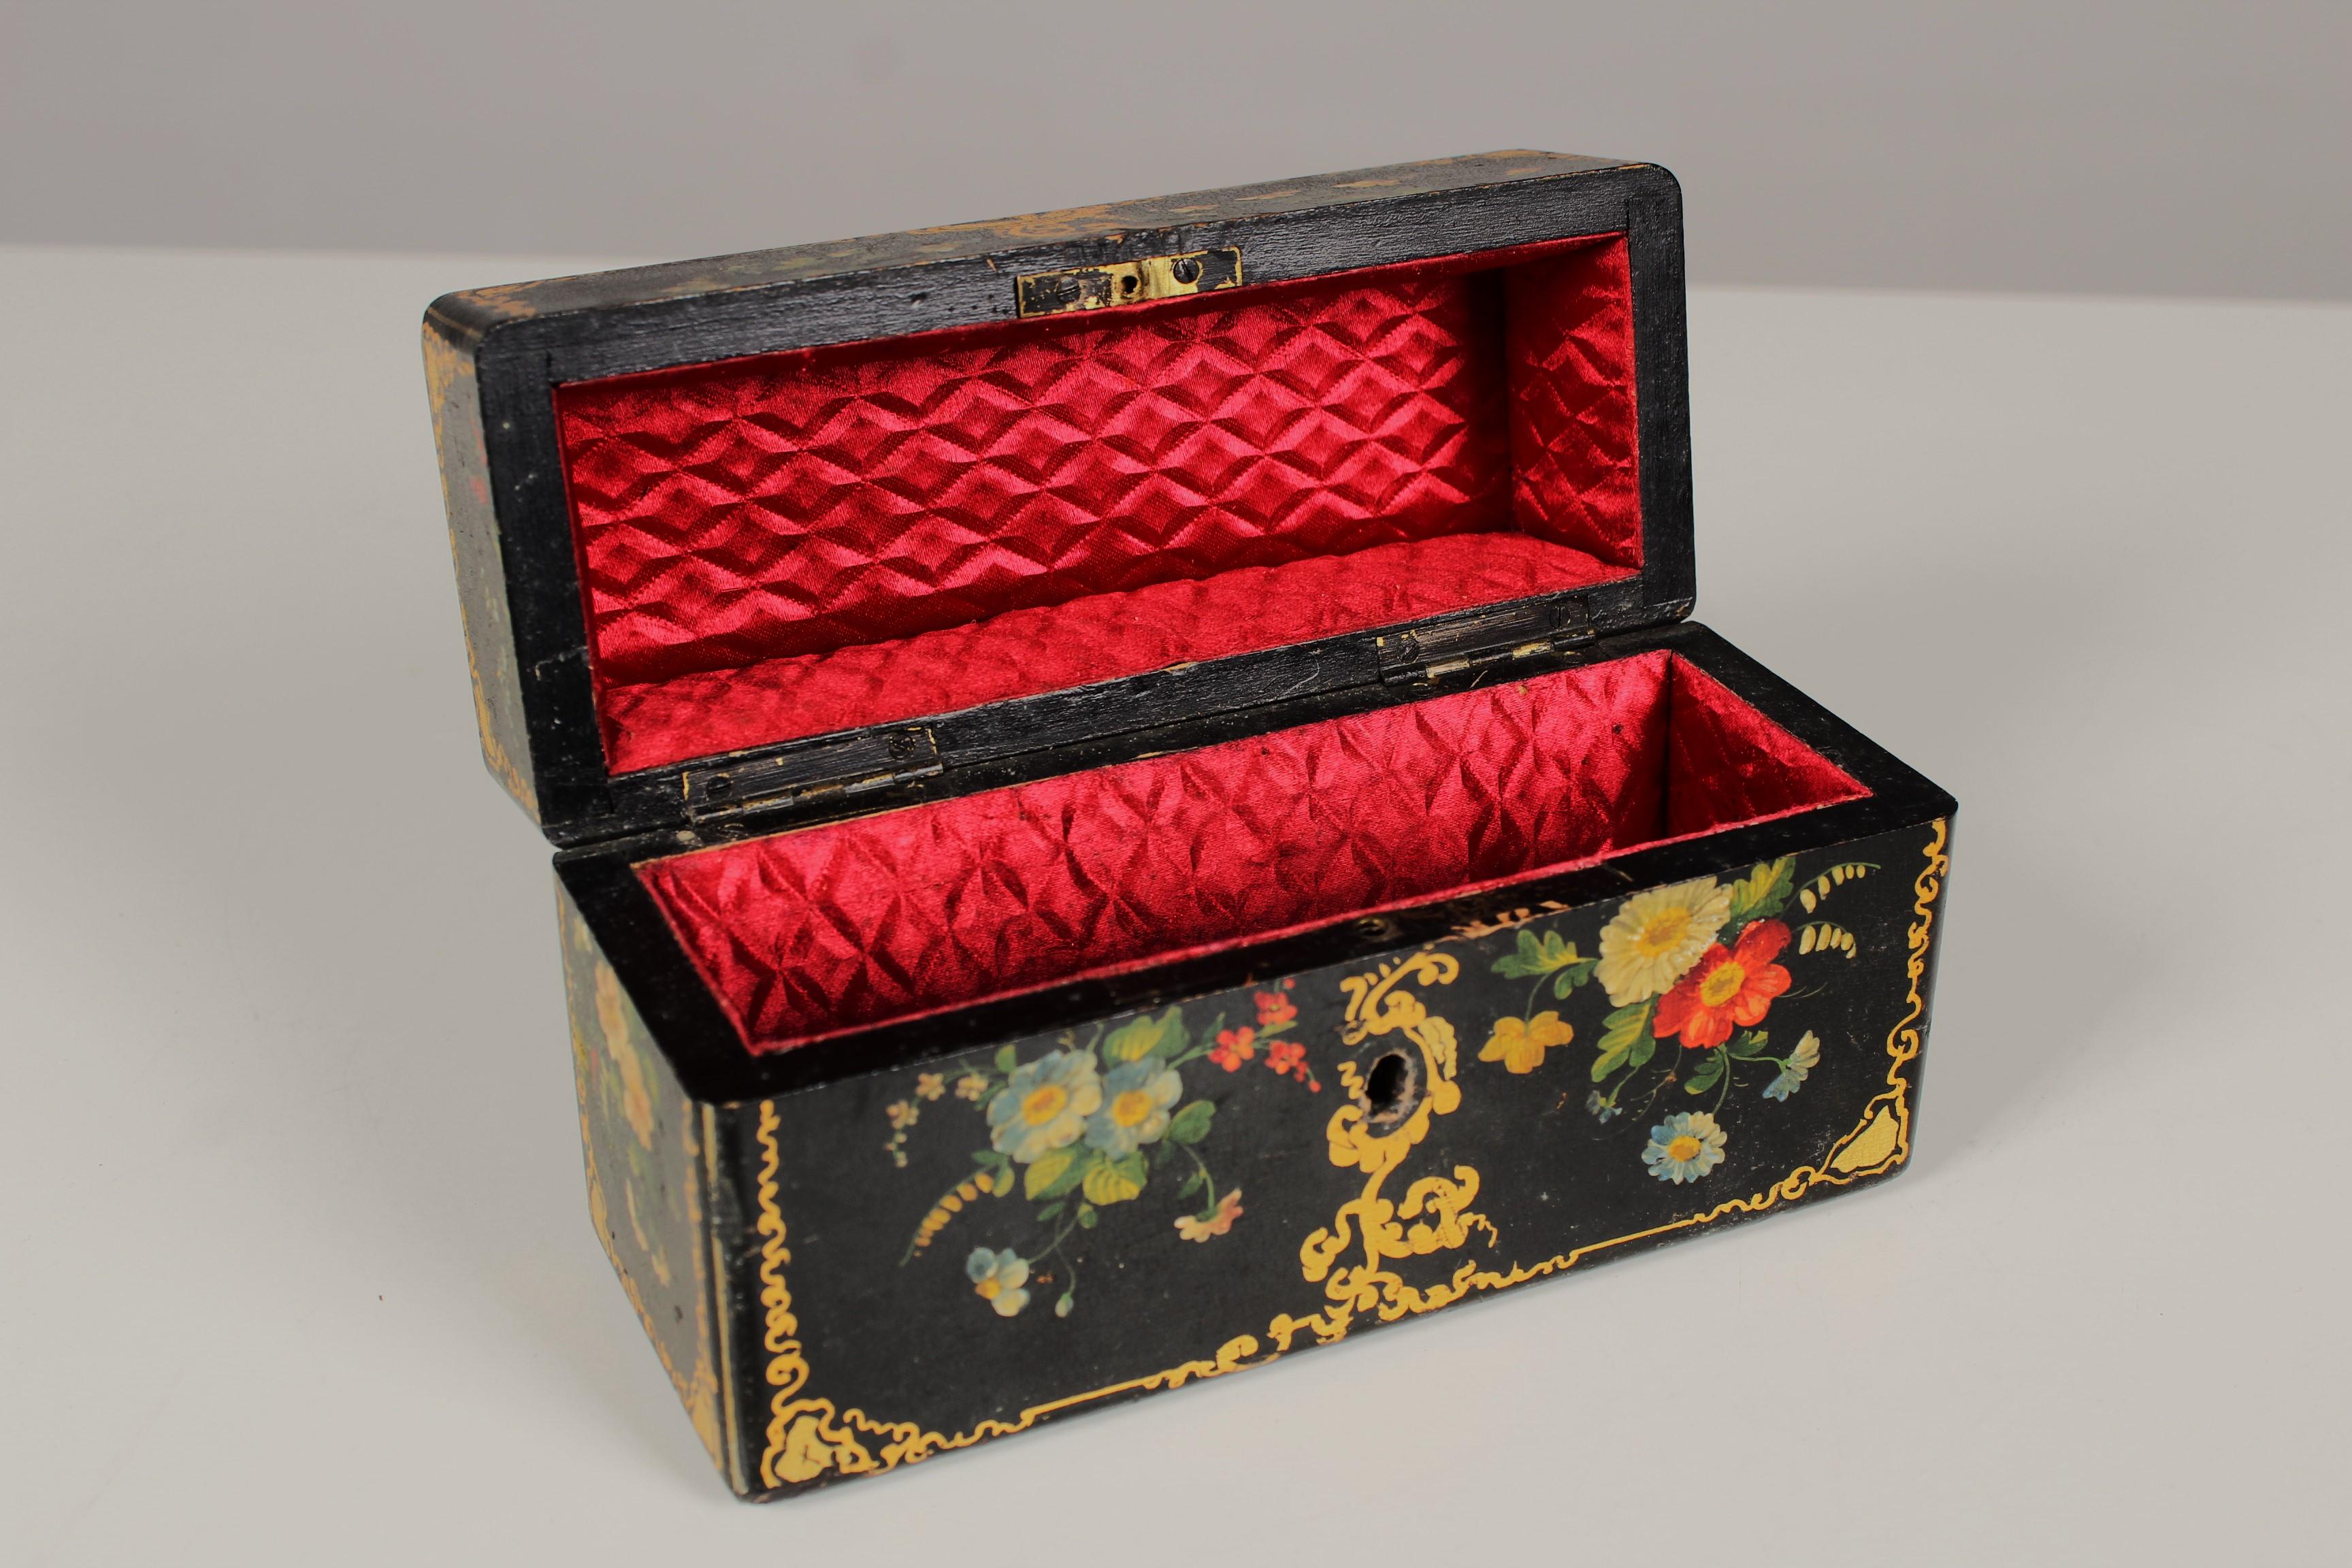 A special unique piece! Hand-painted, probably from France, late 19th century.
Beautiful floral patterns in colorful and golden paint.